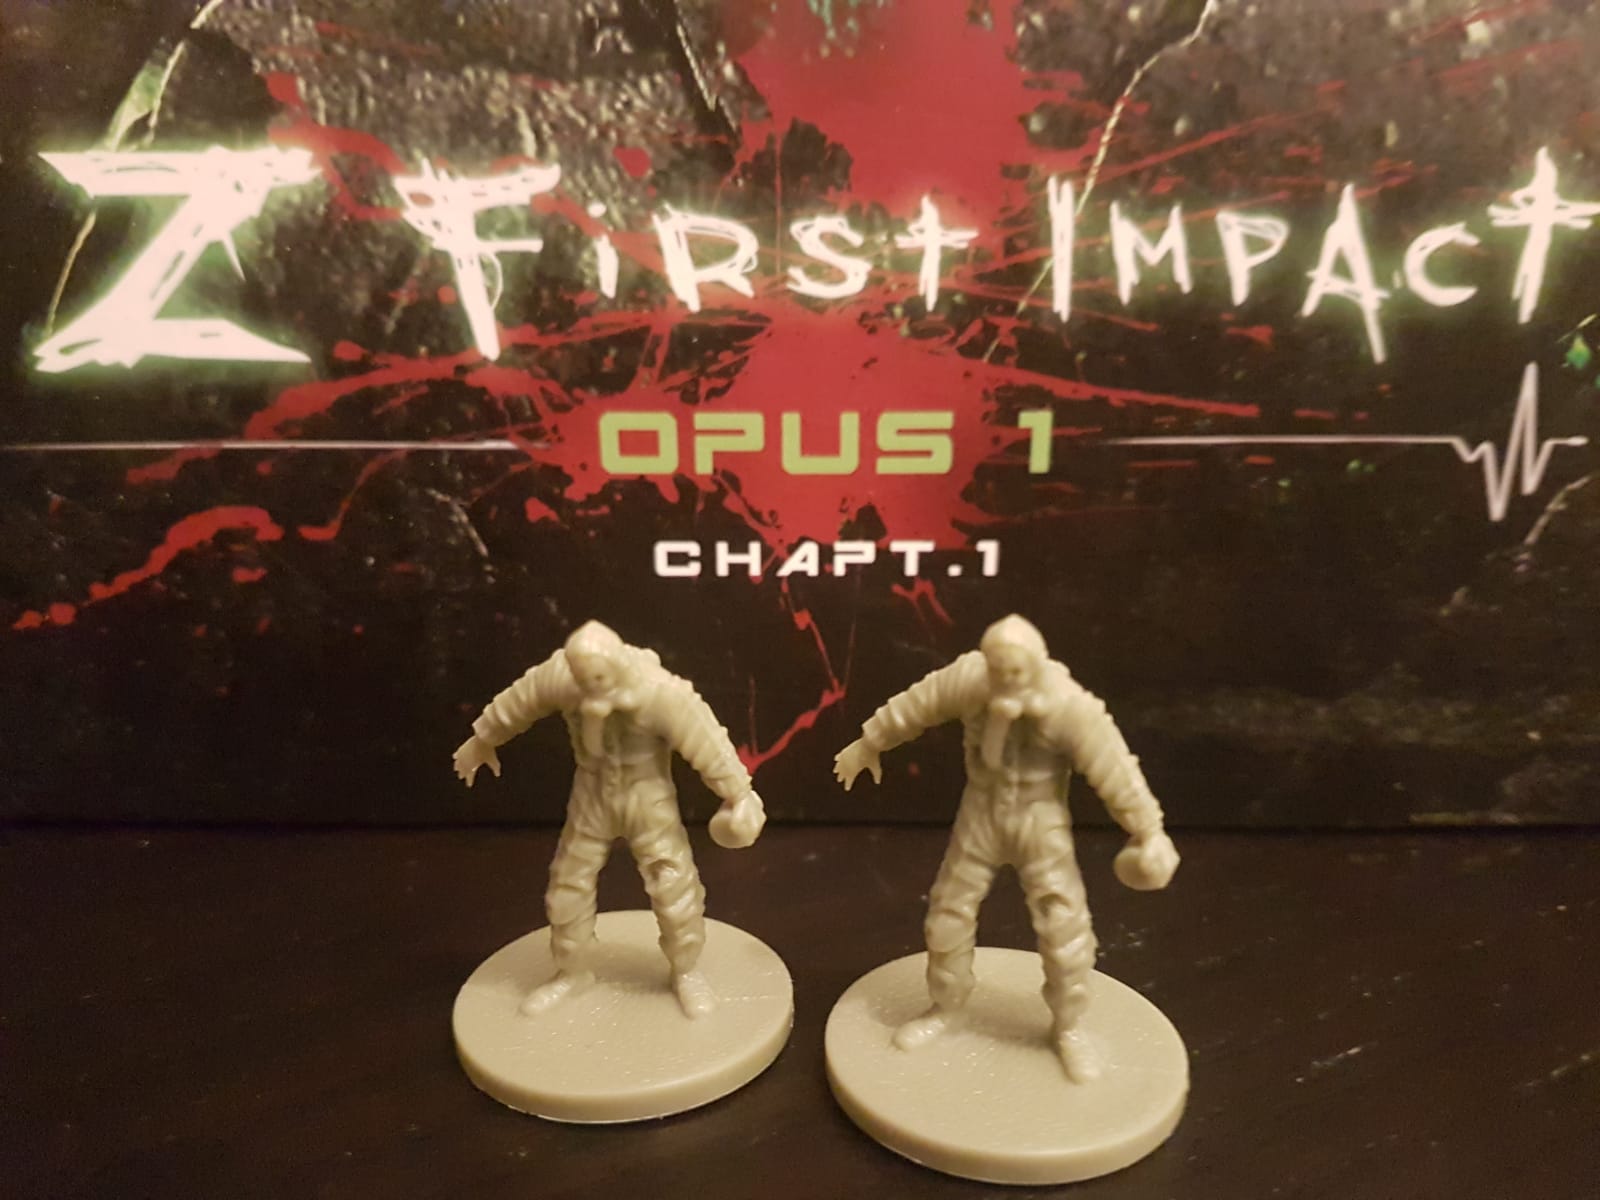 Z First Impact opus 1 : des zombies Made in France chez Z or Alive Compagnie